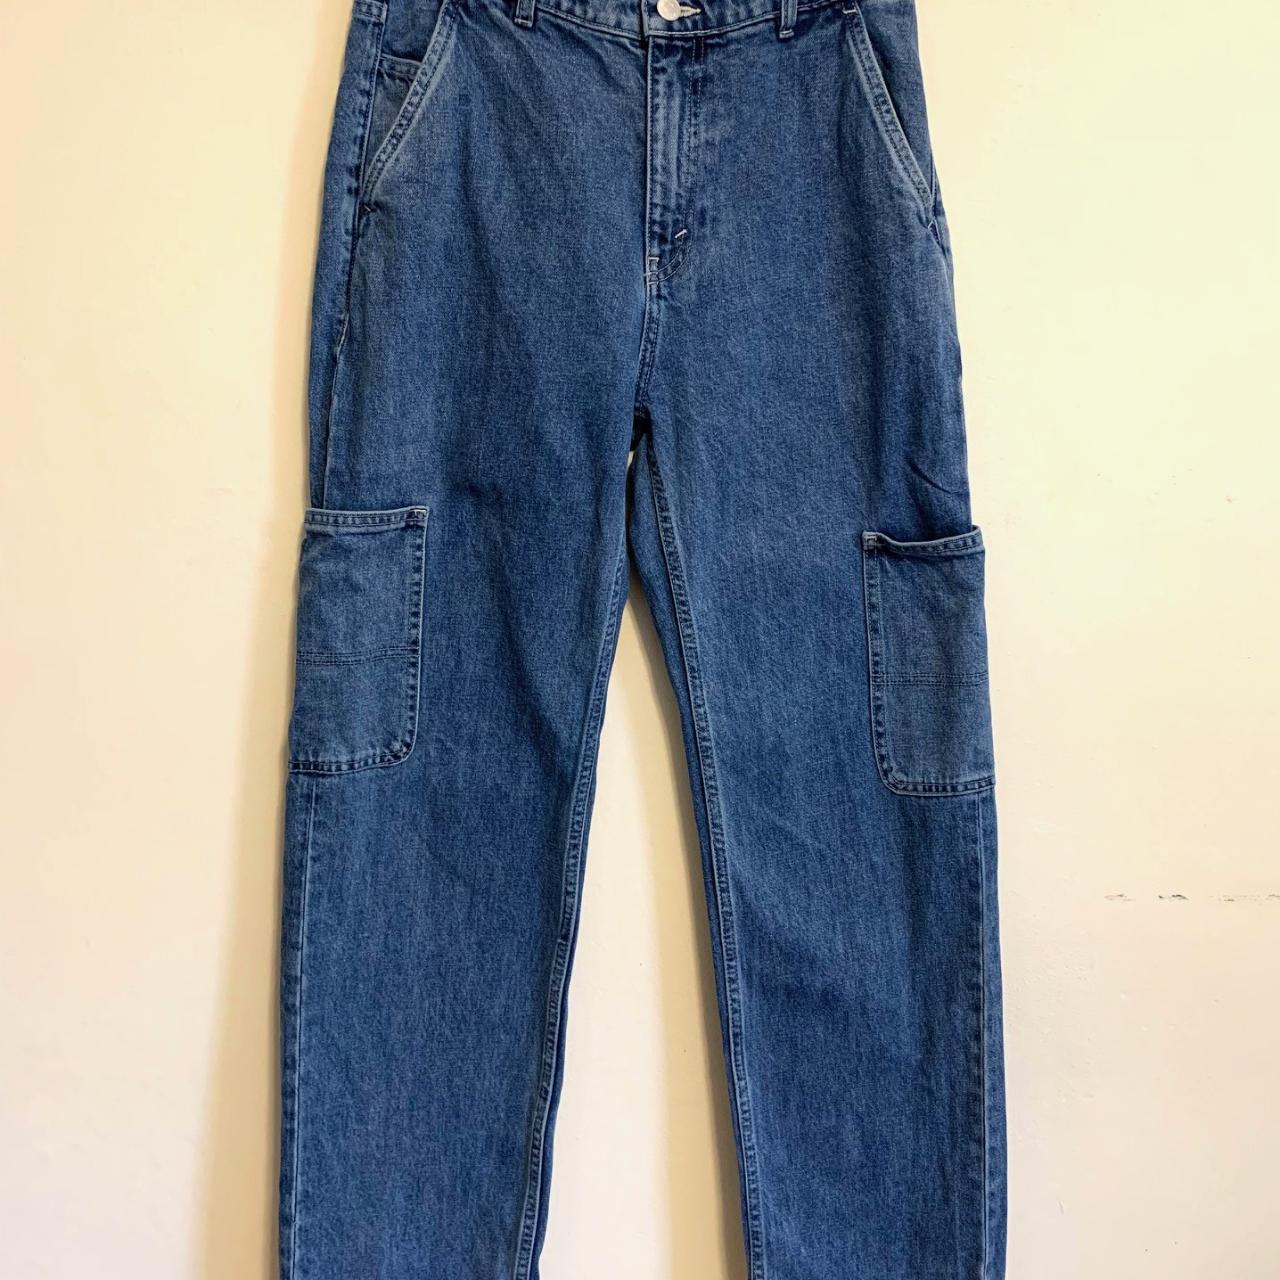 Denim jeans from the brand Monki. Size 27